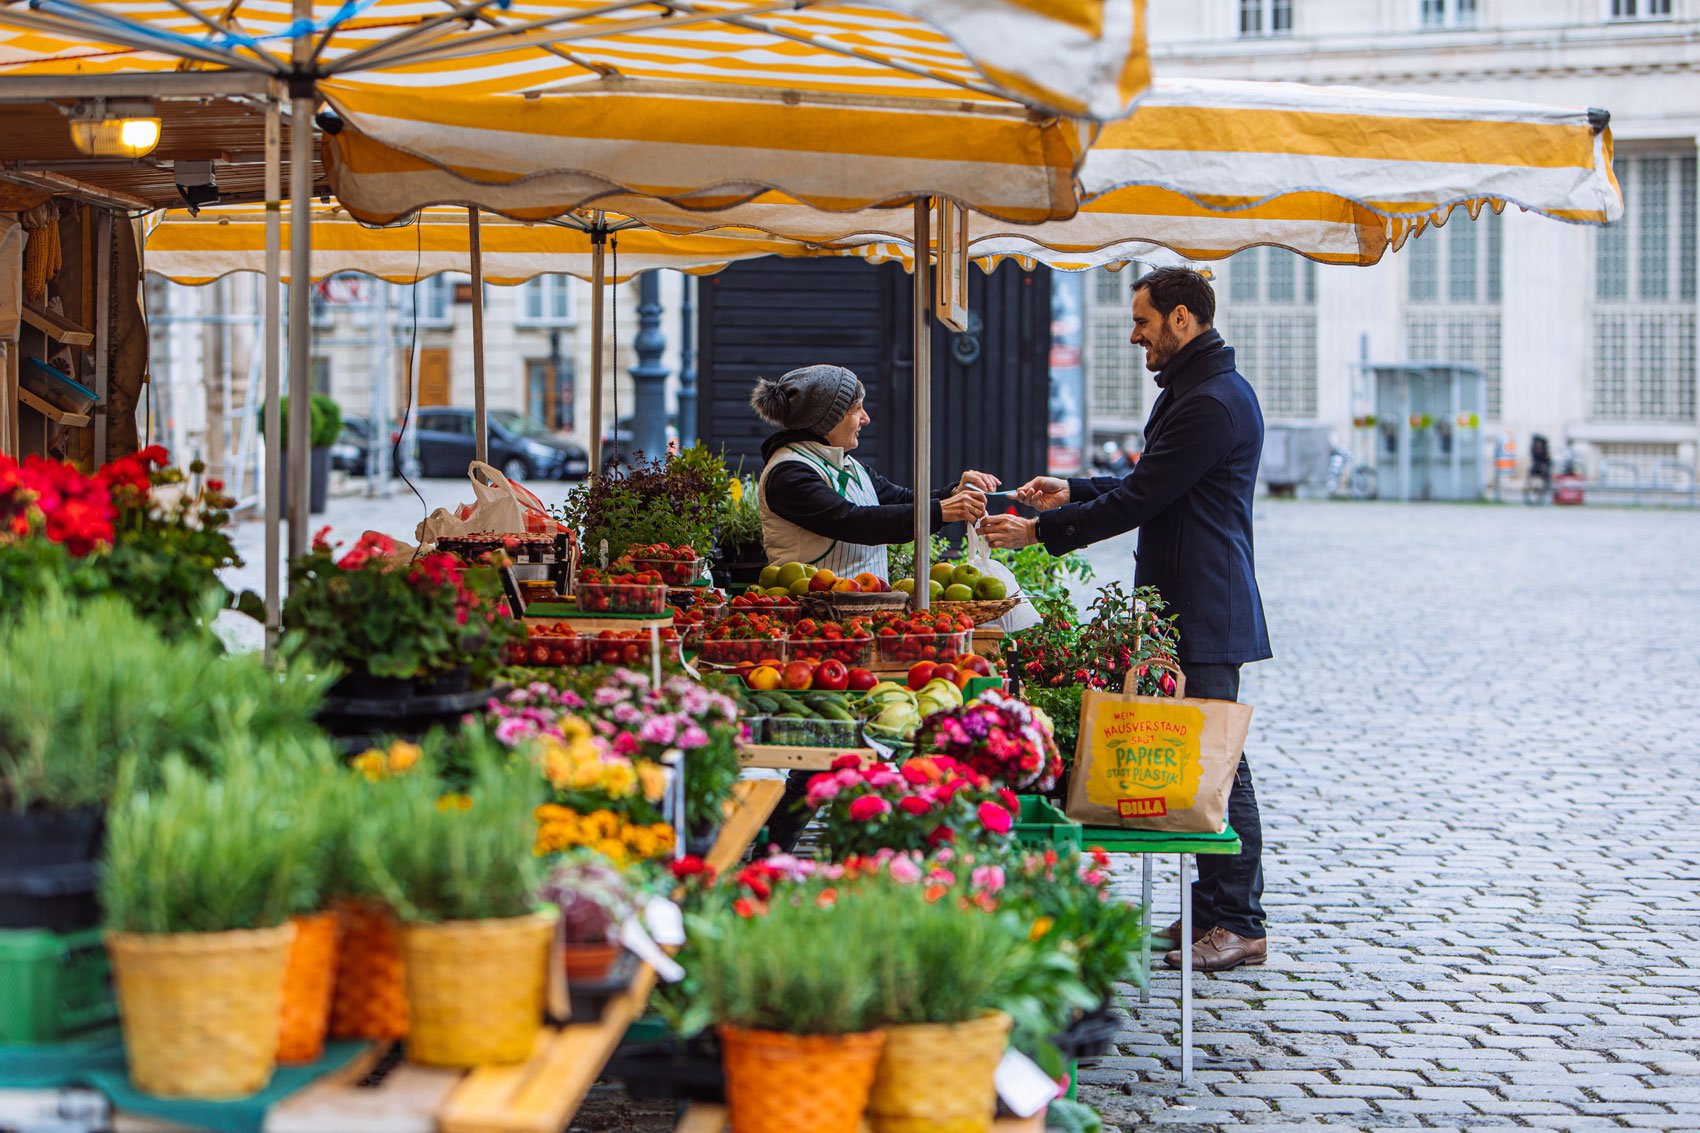 https://5565770.fs1.hubspotusercontent-na1.net/hubfs/5565770/vienna-austria-may-16-2019-local-market-with-fruits-and-vegetables-at-city-square.jpg